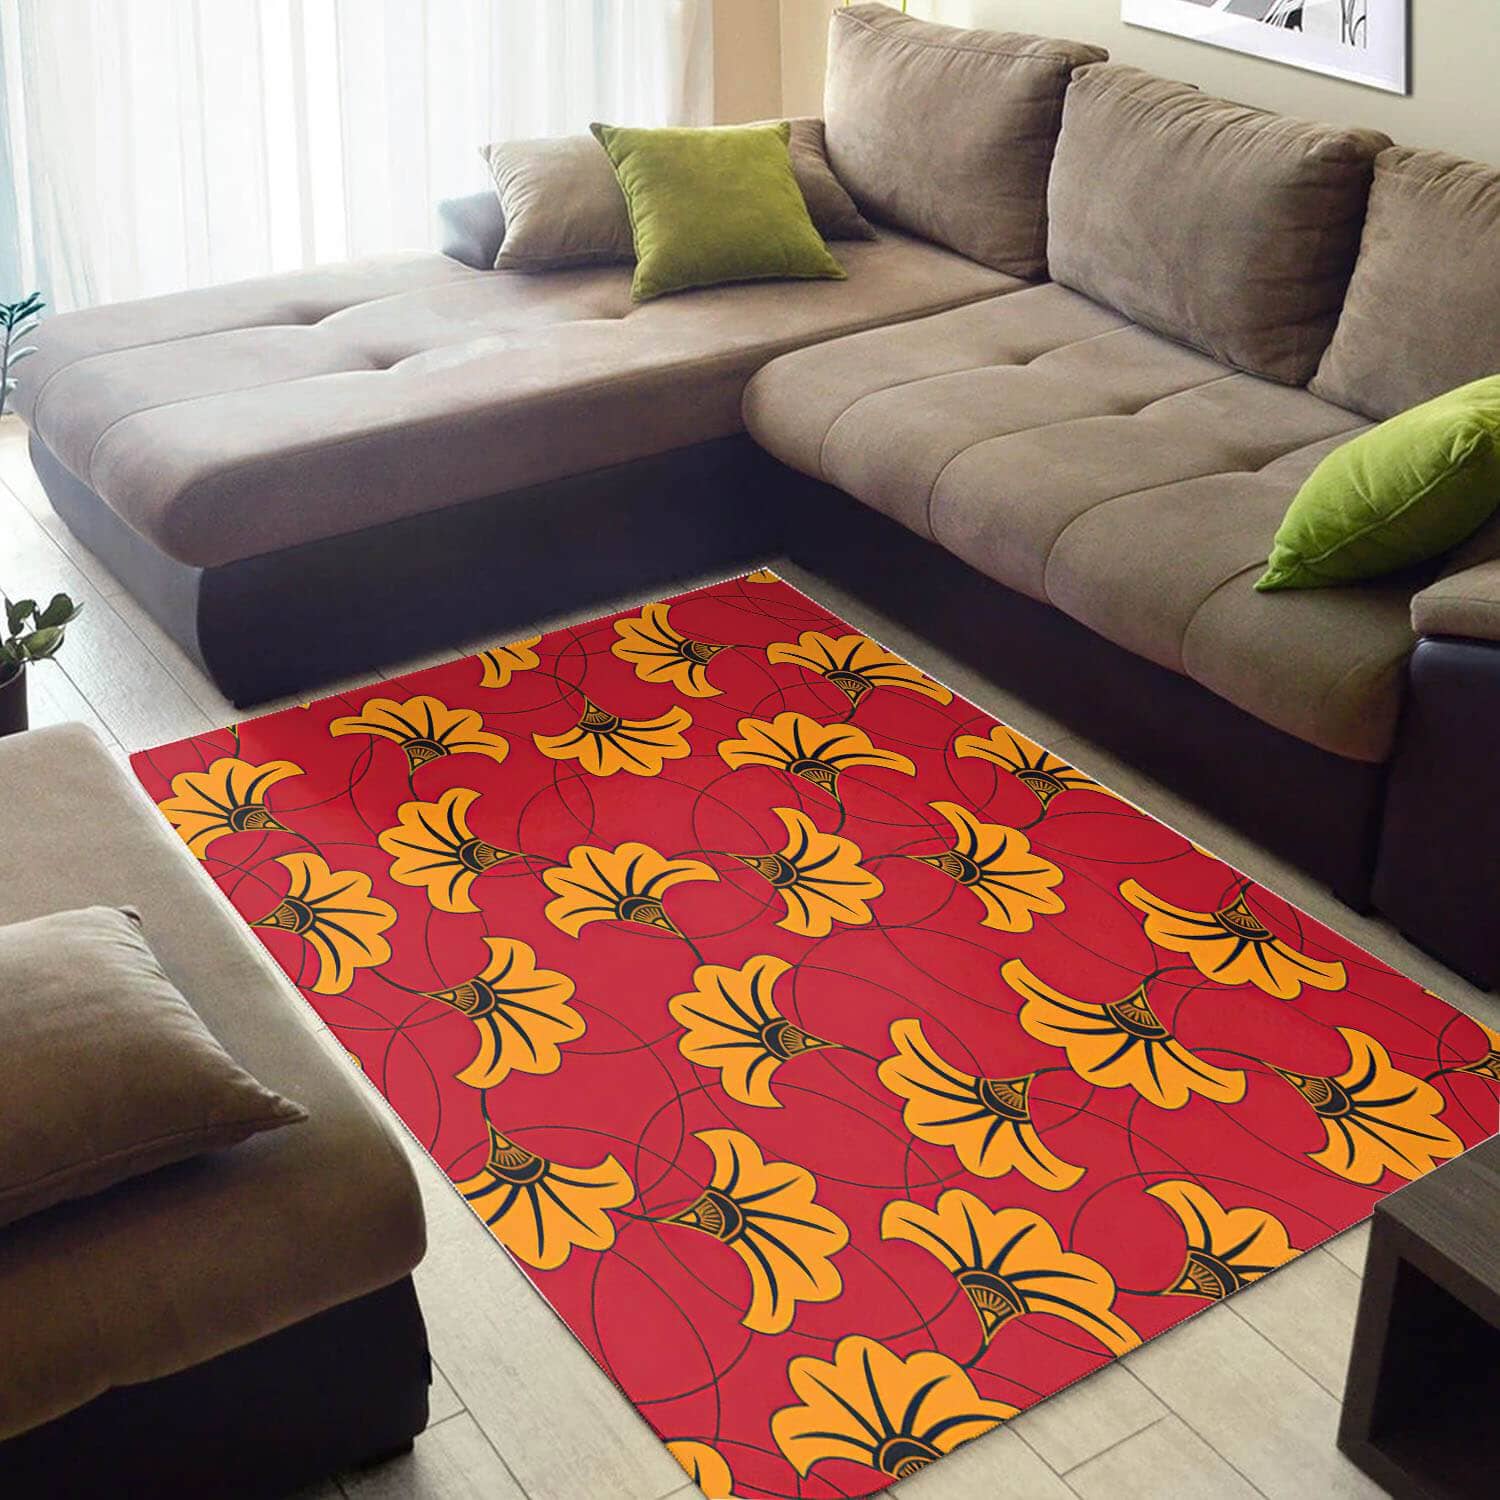 Modern African Style Amazing American Ethnic Seamless Pattern Themed Carpet Room Rug